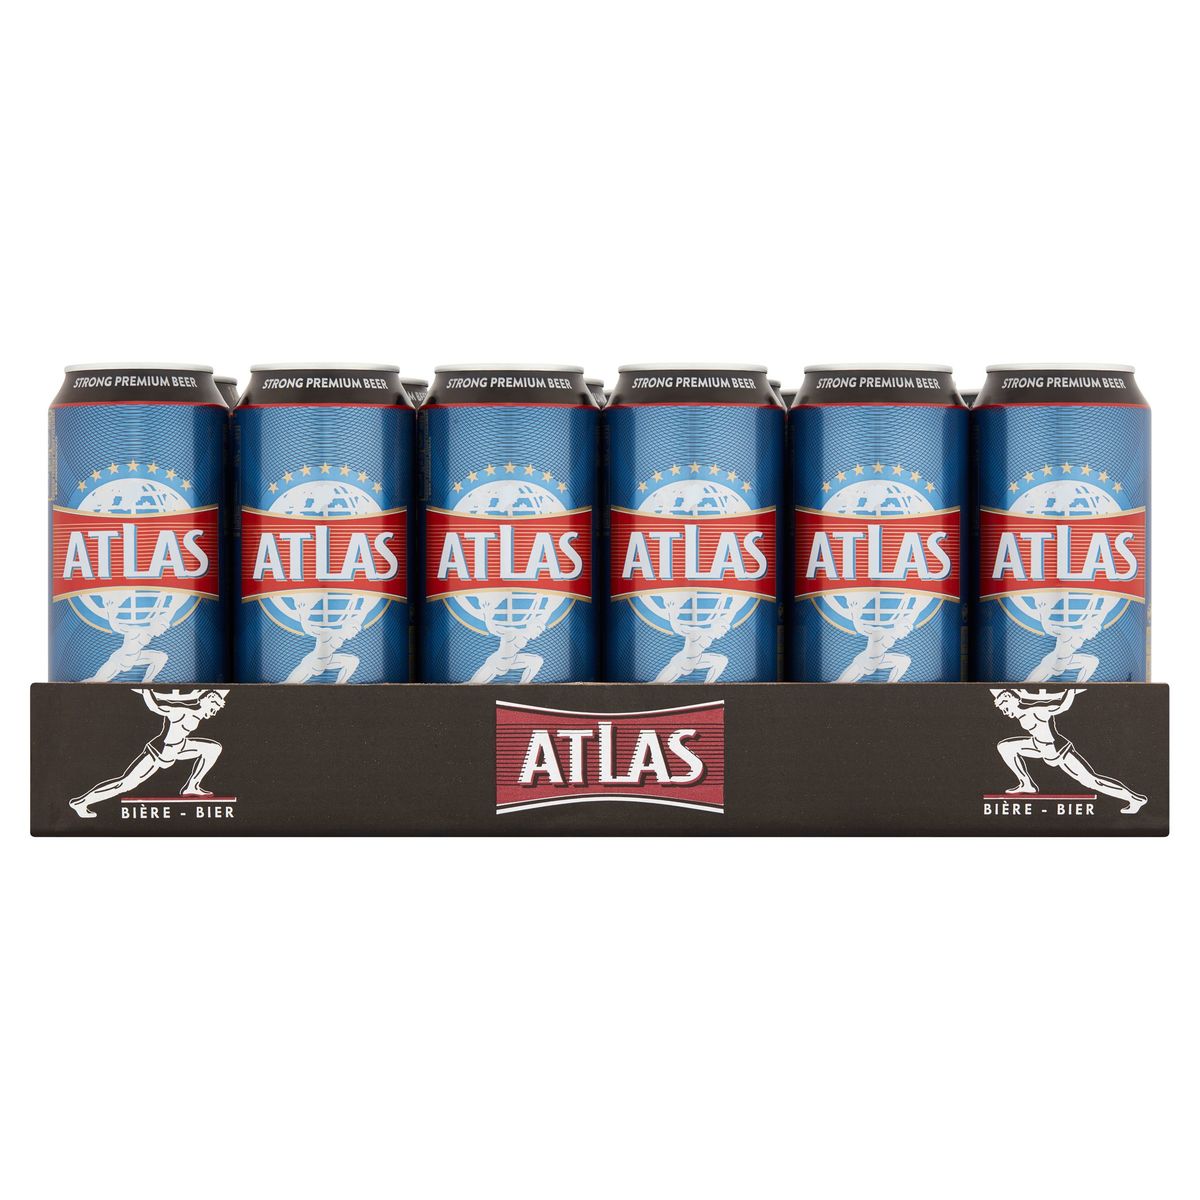 Atlas Strong Premium Beer 7.2% Canettes 24x50 cl